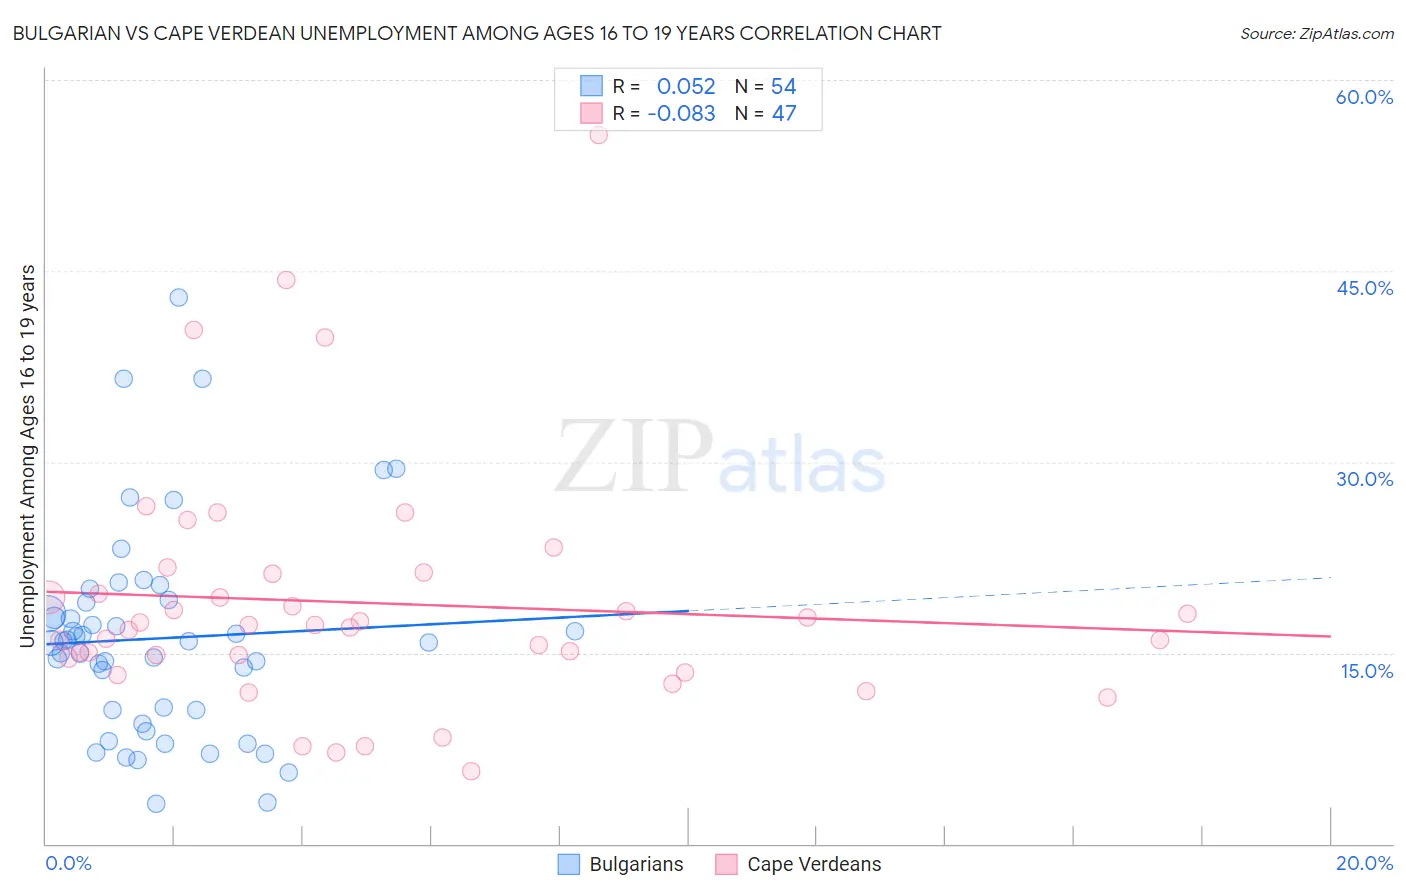 Bulgarian vs Cape Verdean Unemployment Among Ages 16 to 19 years